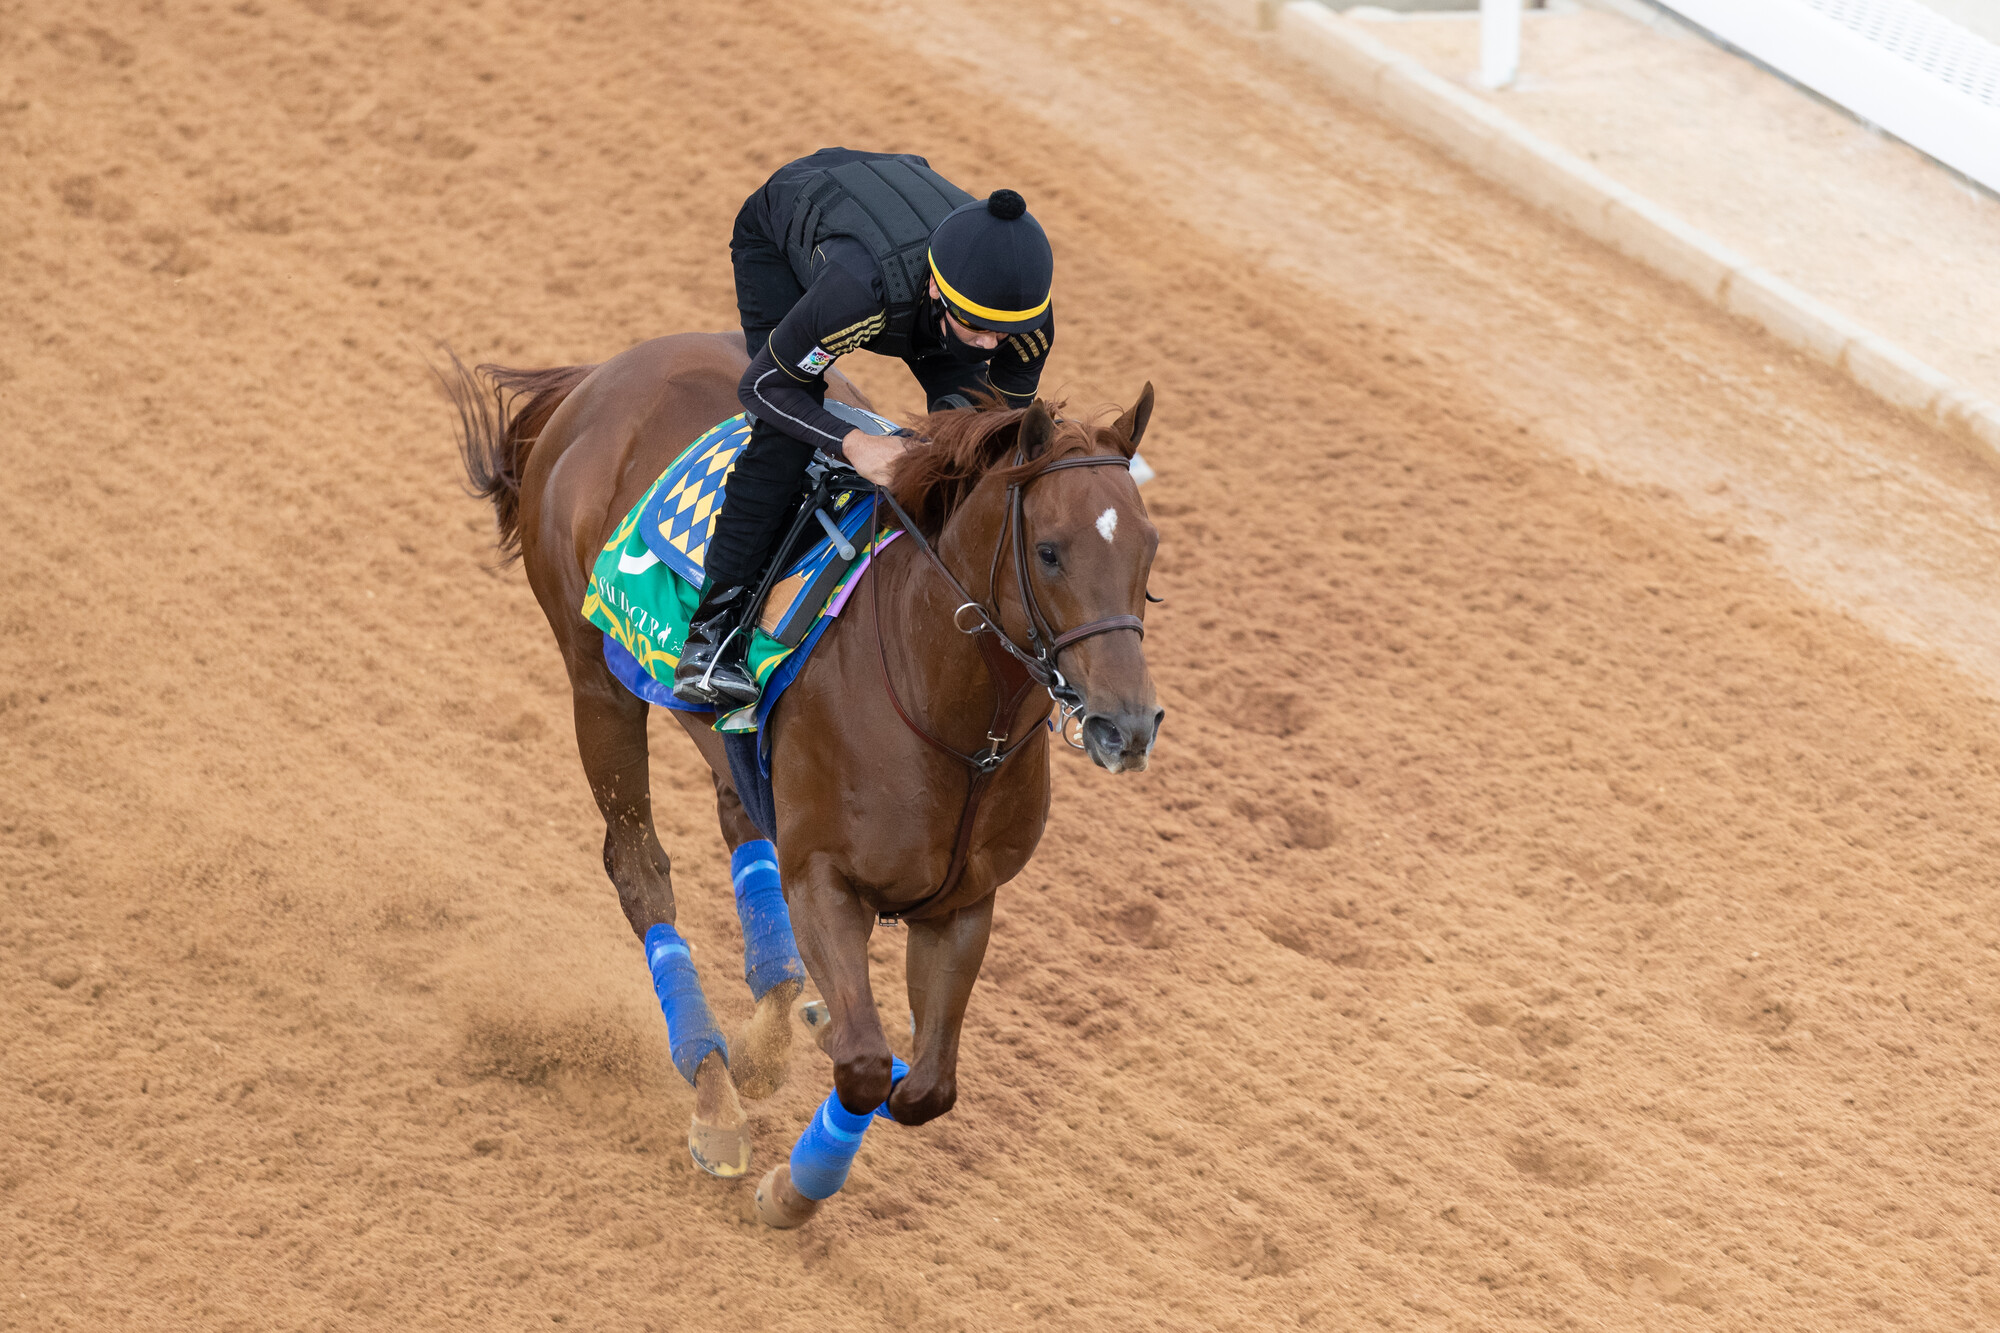 Charlatan on the King Abdulaziz track on Thursday: ‘Big Money’ Mike Smith will be out to go one better on the Bob Baffert-trained colt in the Saudi Cup on Saturday. Photo: Neville Hopwood/Jockey Club of Saudi Arabia